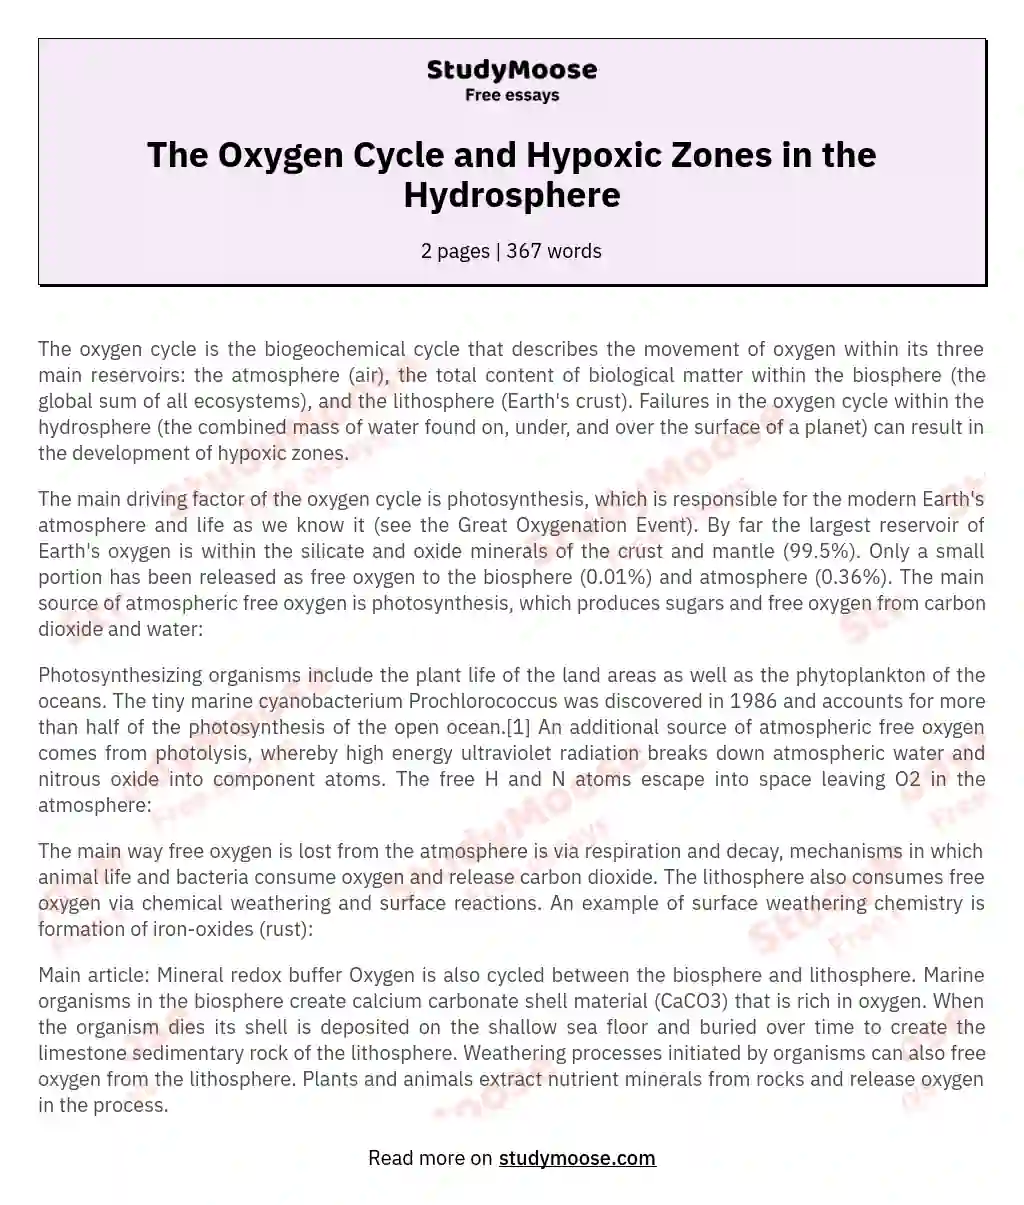 The Oxygen Cycle and Hypoxic Zones in the Hydrosphere essay